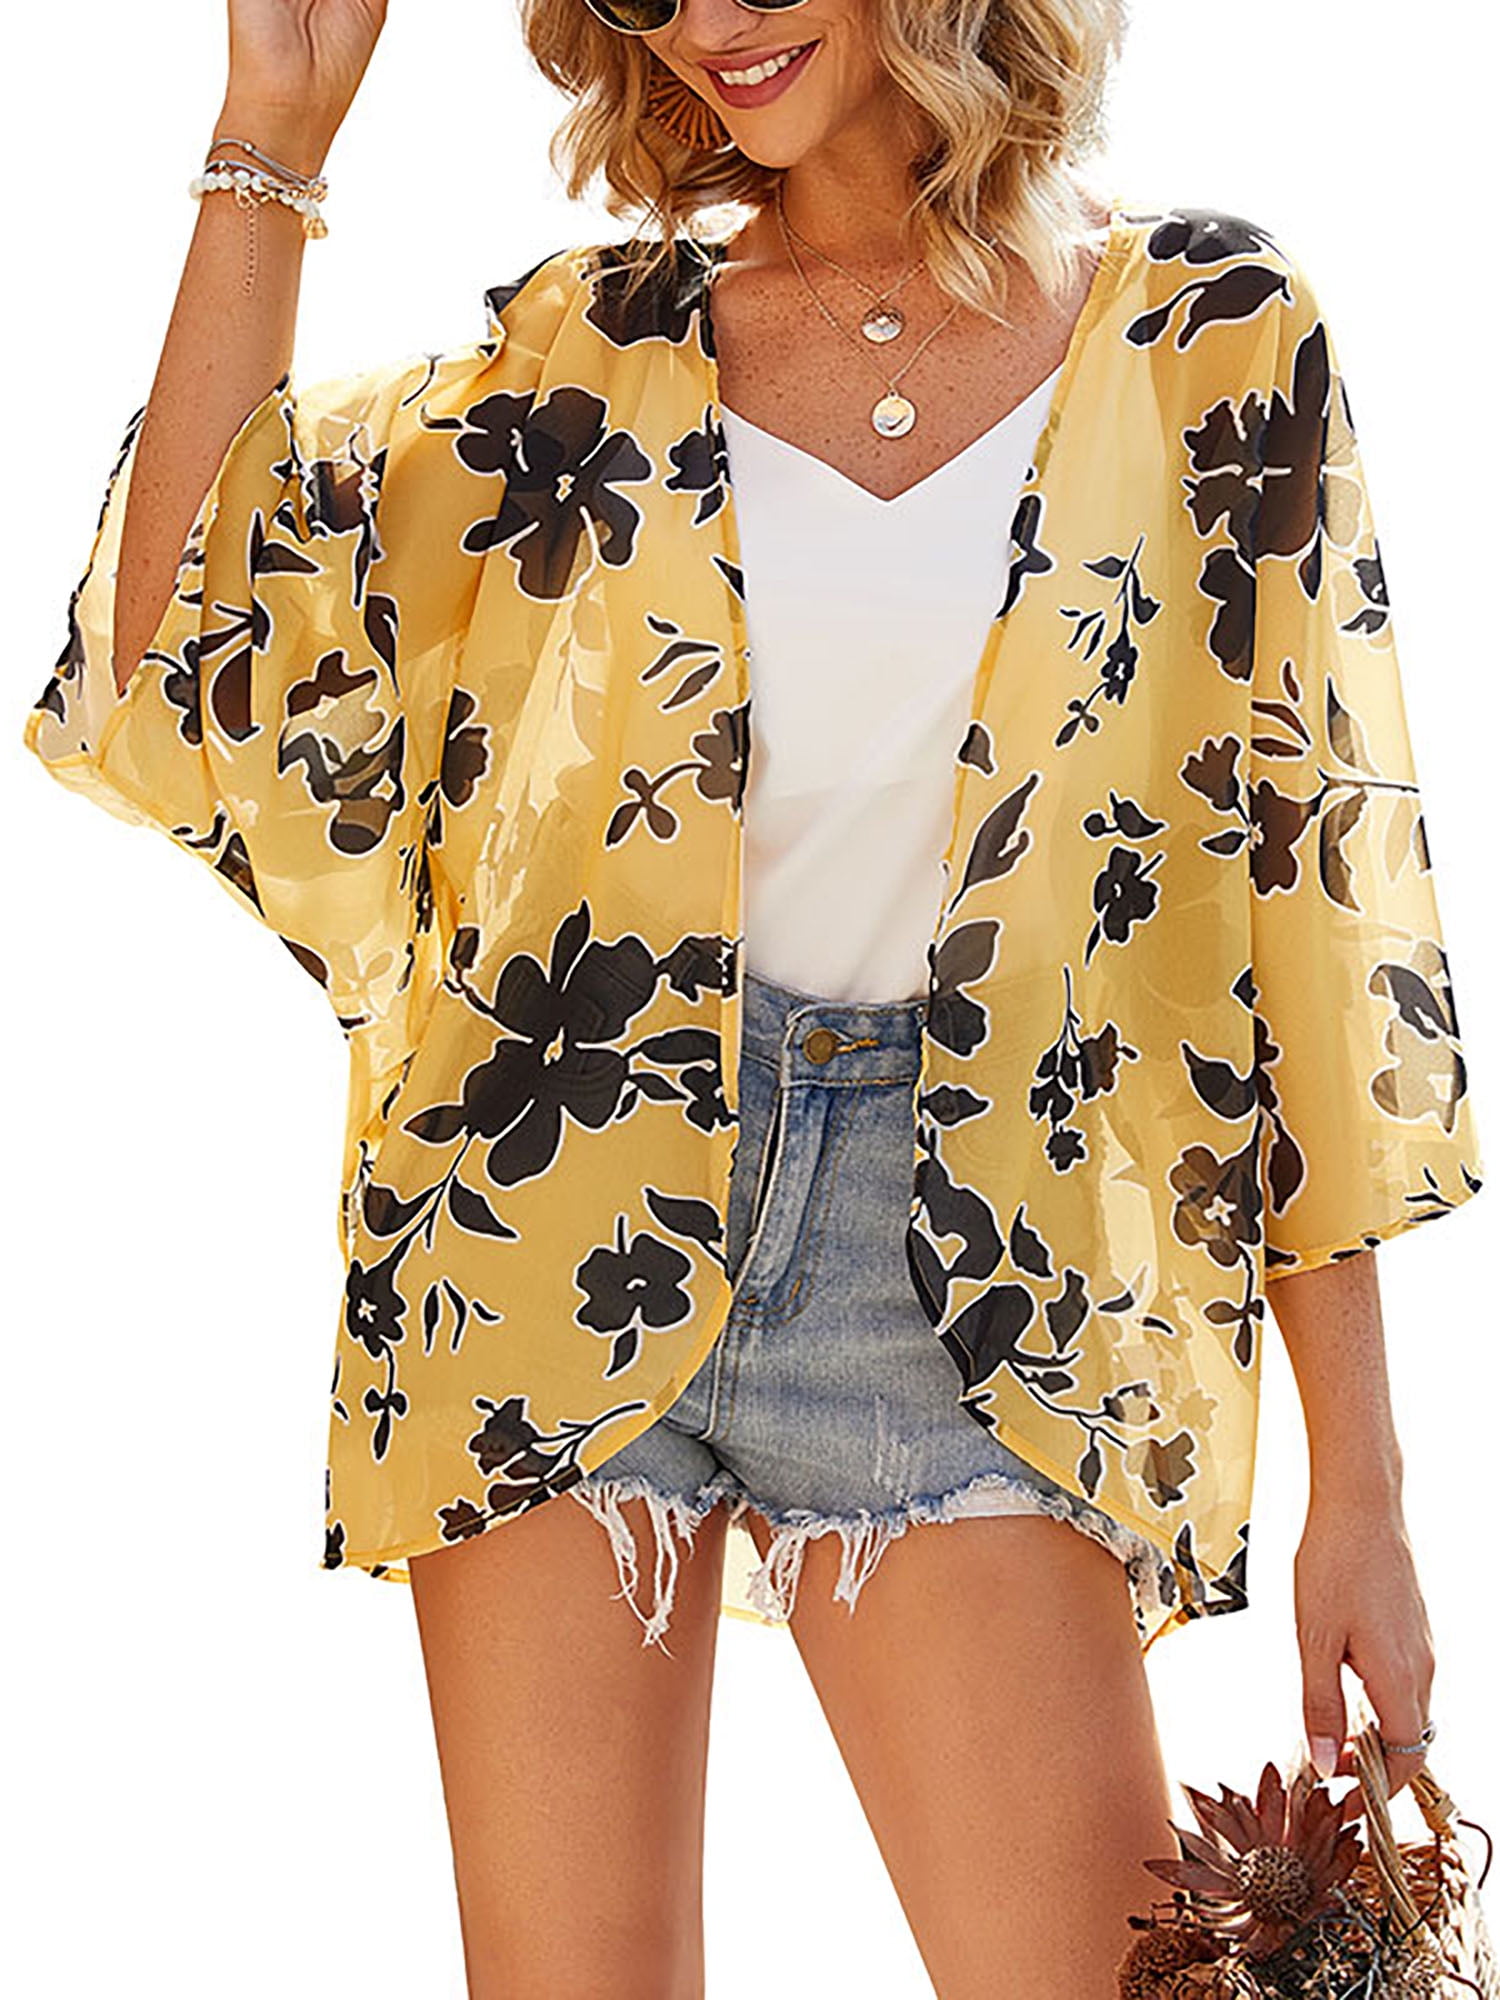 Fudule Womens Summer Shawl Print Kimono Cardigans Chiffon Beach Cover Up Blouse Loose Open Front Tops Capes